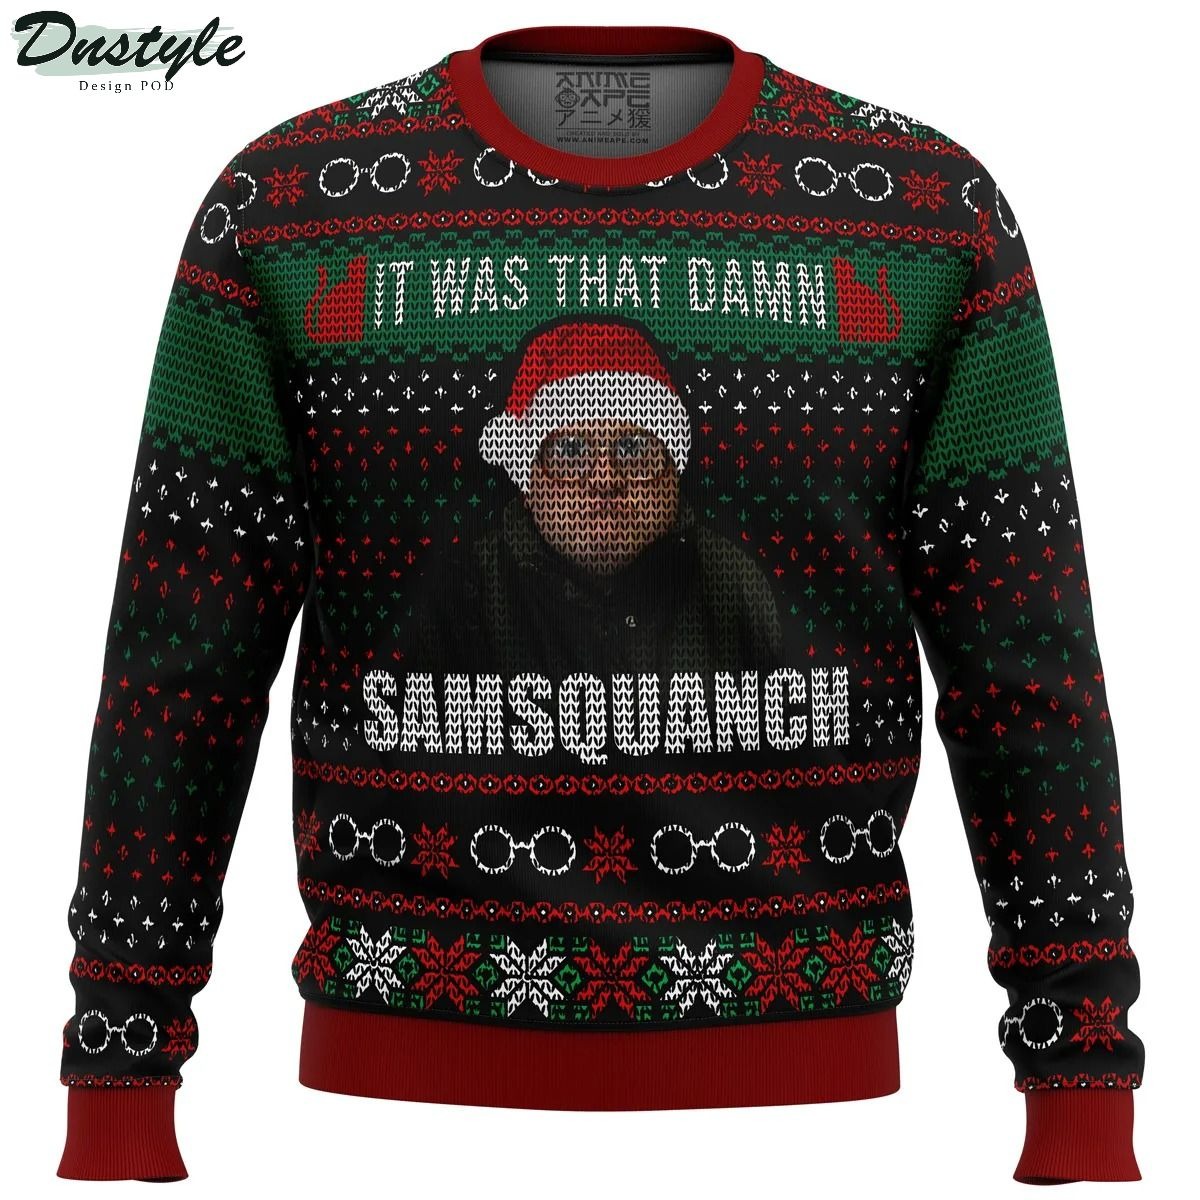 Trailer Park Boys Samsquanch Ugly Christmas Sweater